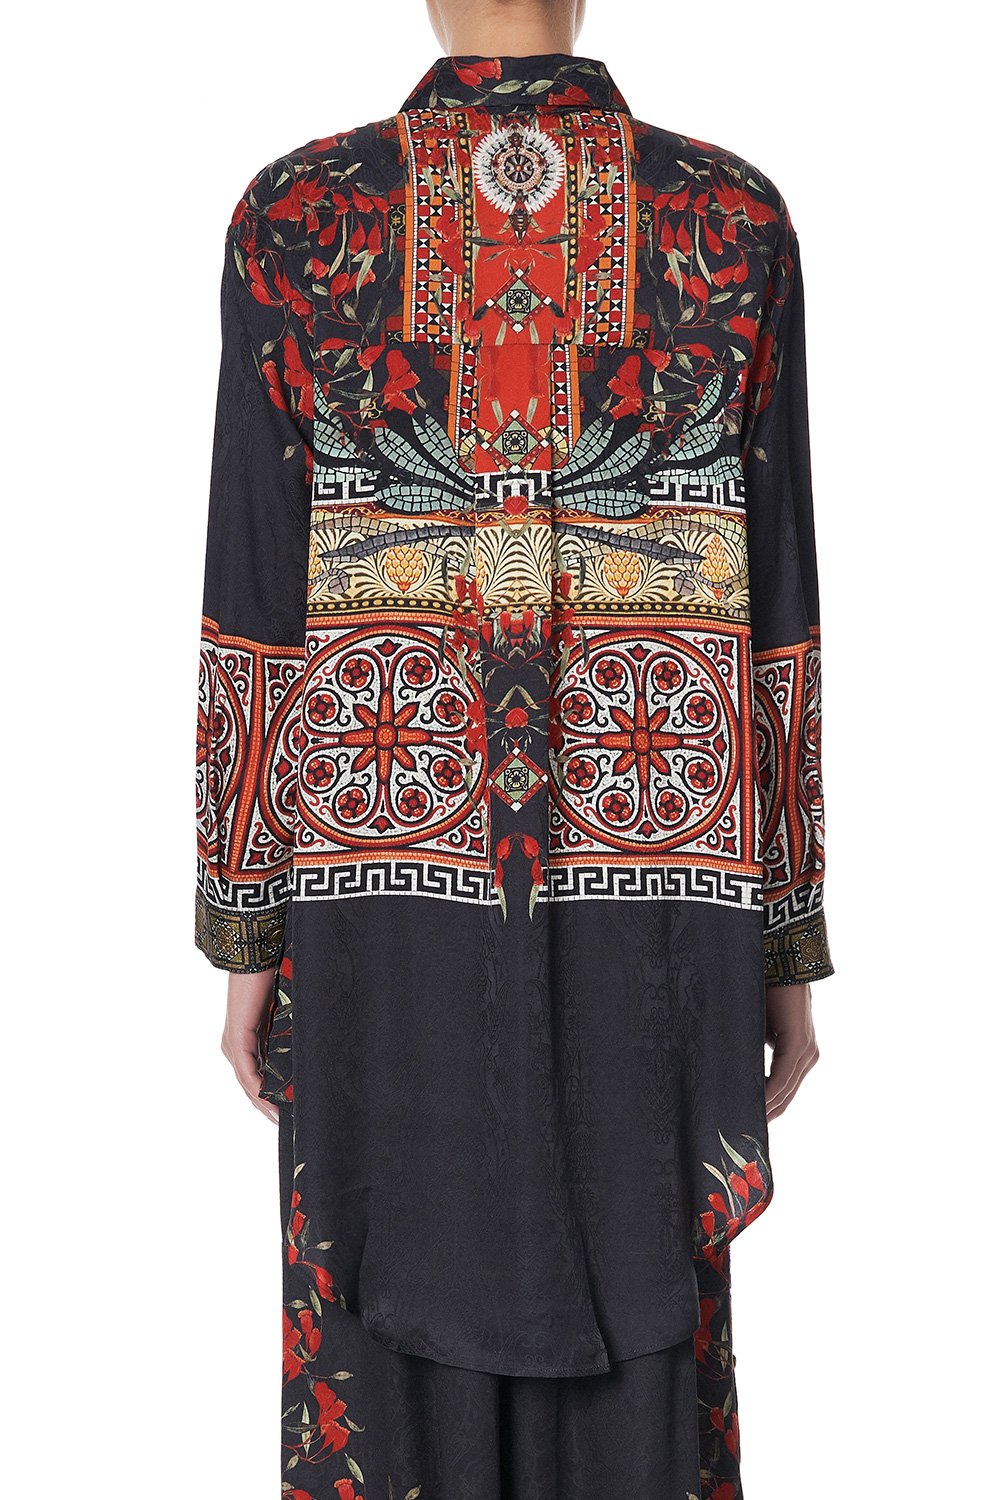 SHIRT TUNIC WITH POCKETS PAVED IN PAISLEY